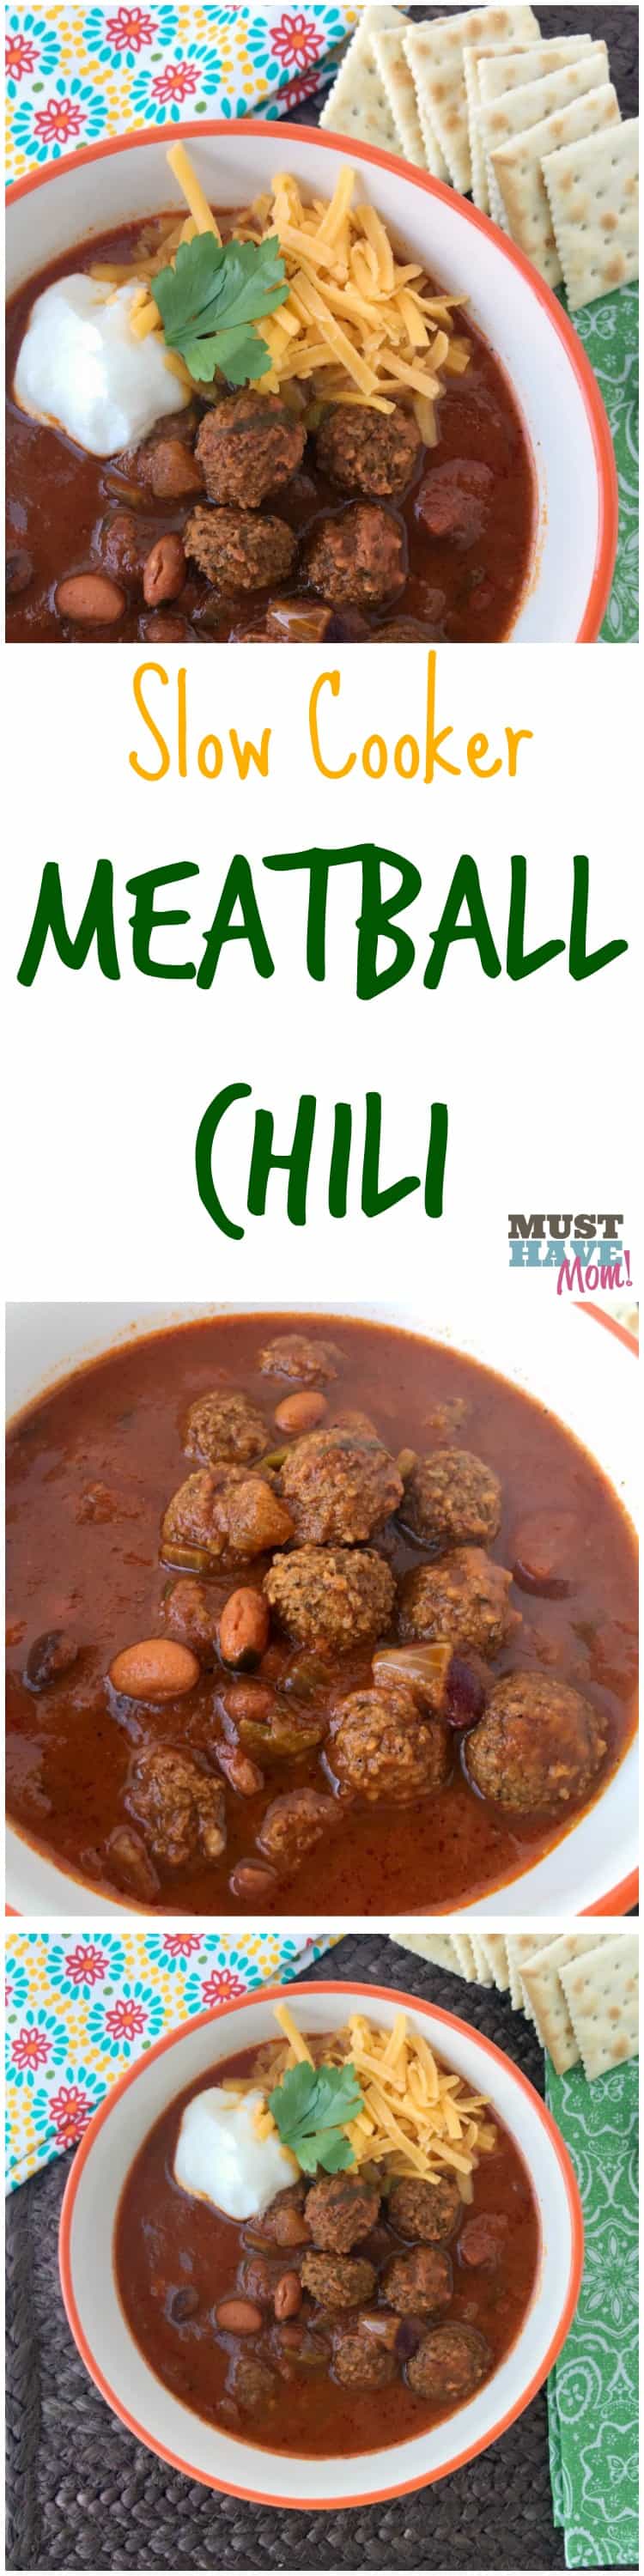 Easy Meatball Chili recipe you can make in the slow cooker or stove top! Delicious twist on regular chili! Fall recipes slow cooker chili for game day!